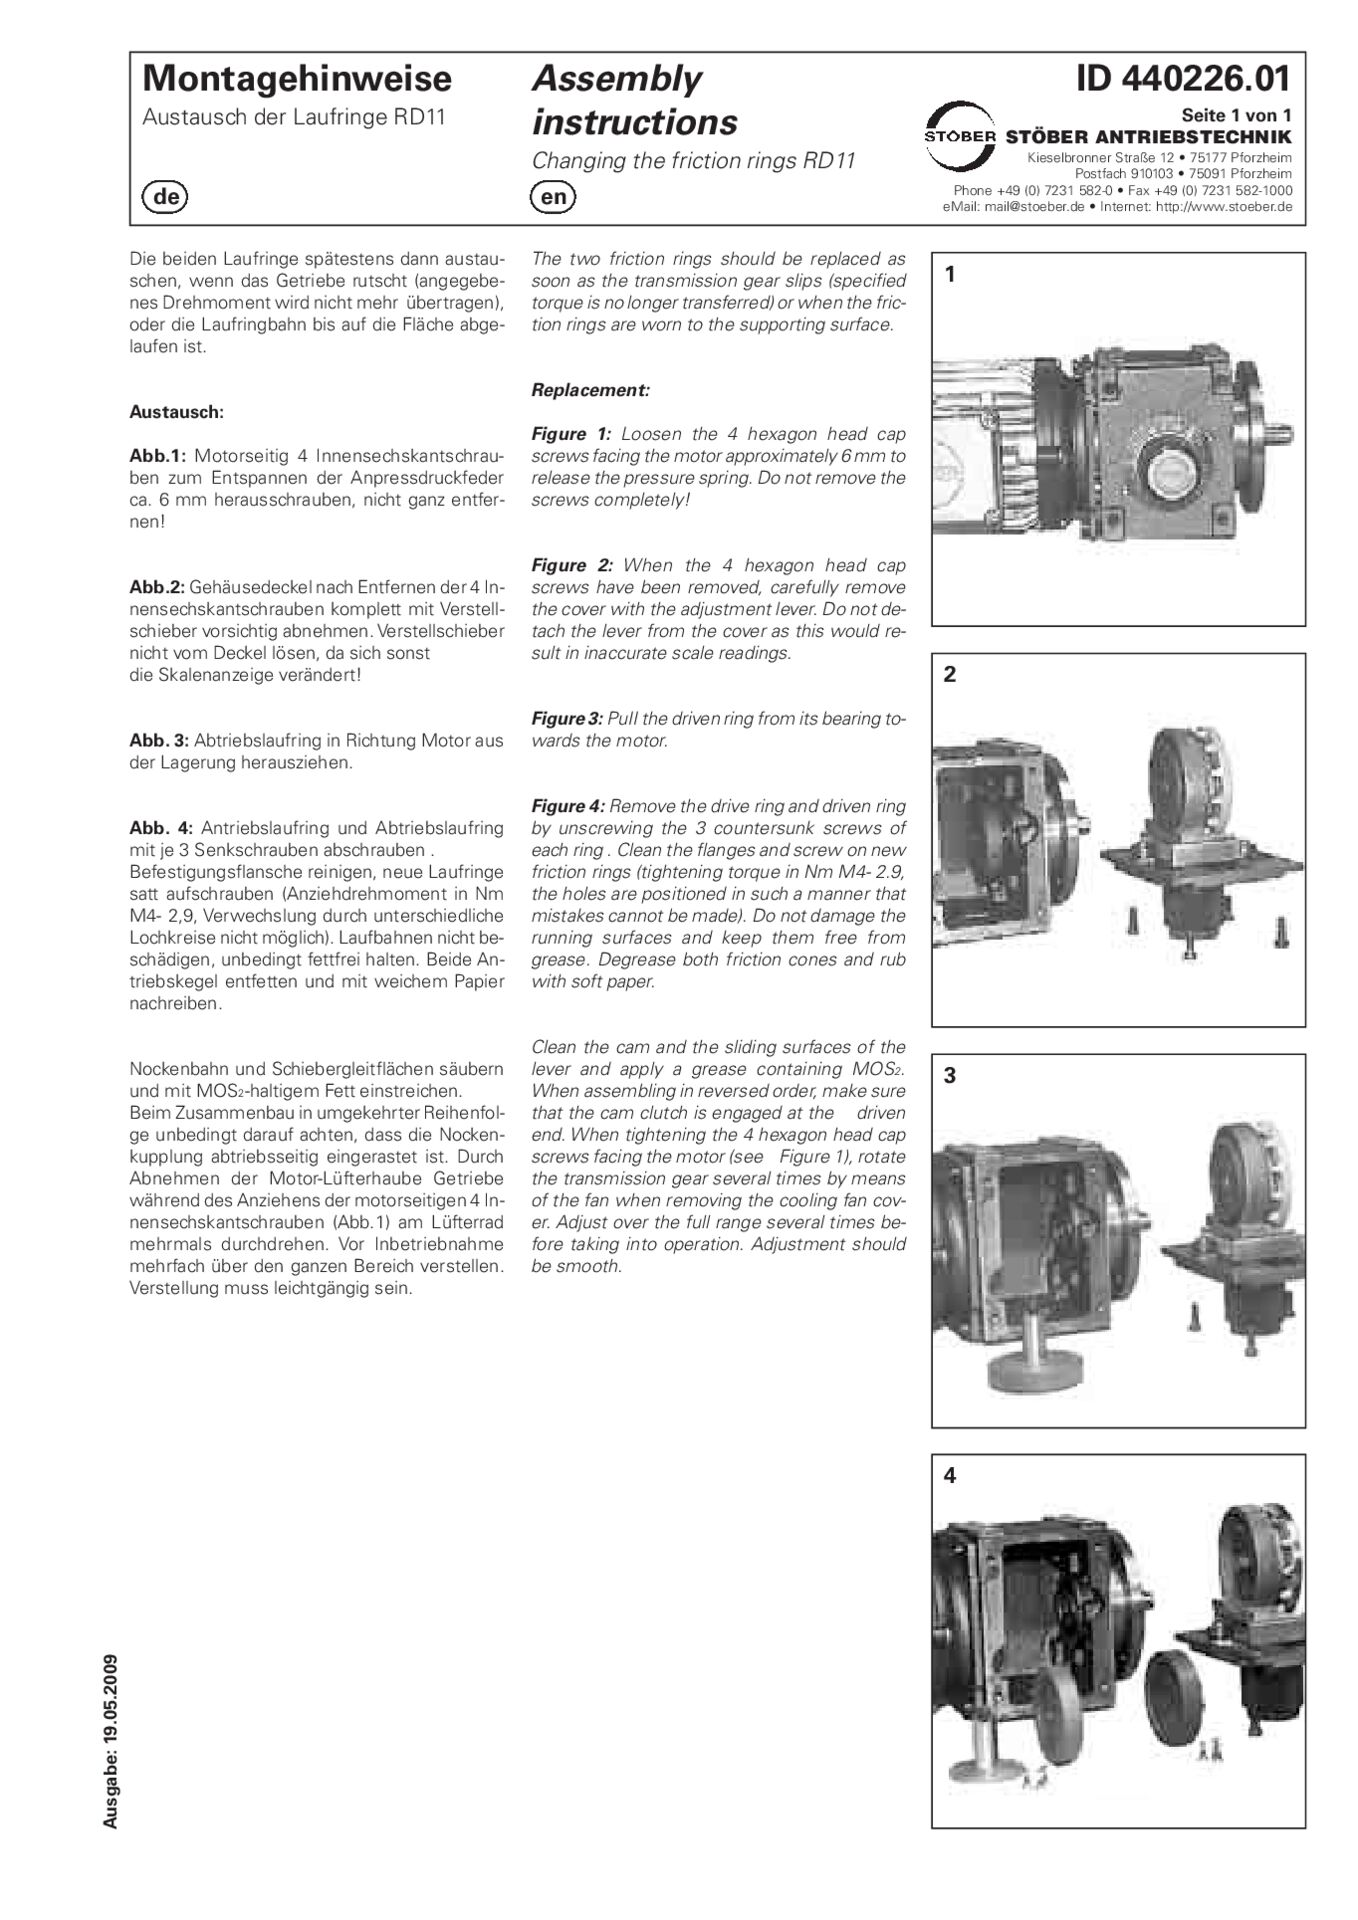 Montageanleitung Austausch der Laufringe RD11Assembly instructions Changing the friction rings RD11